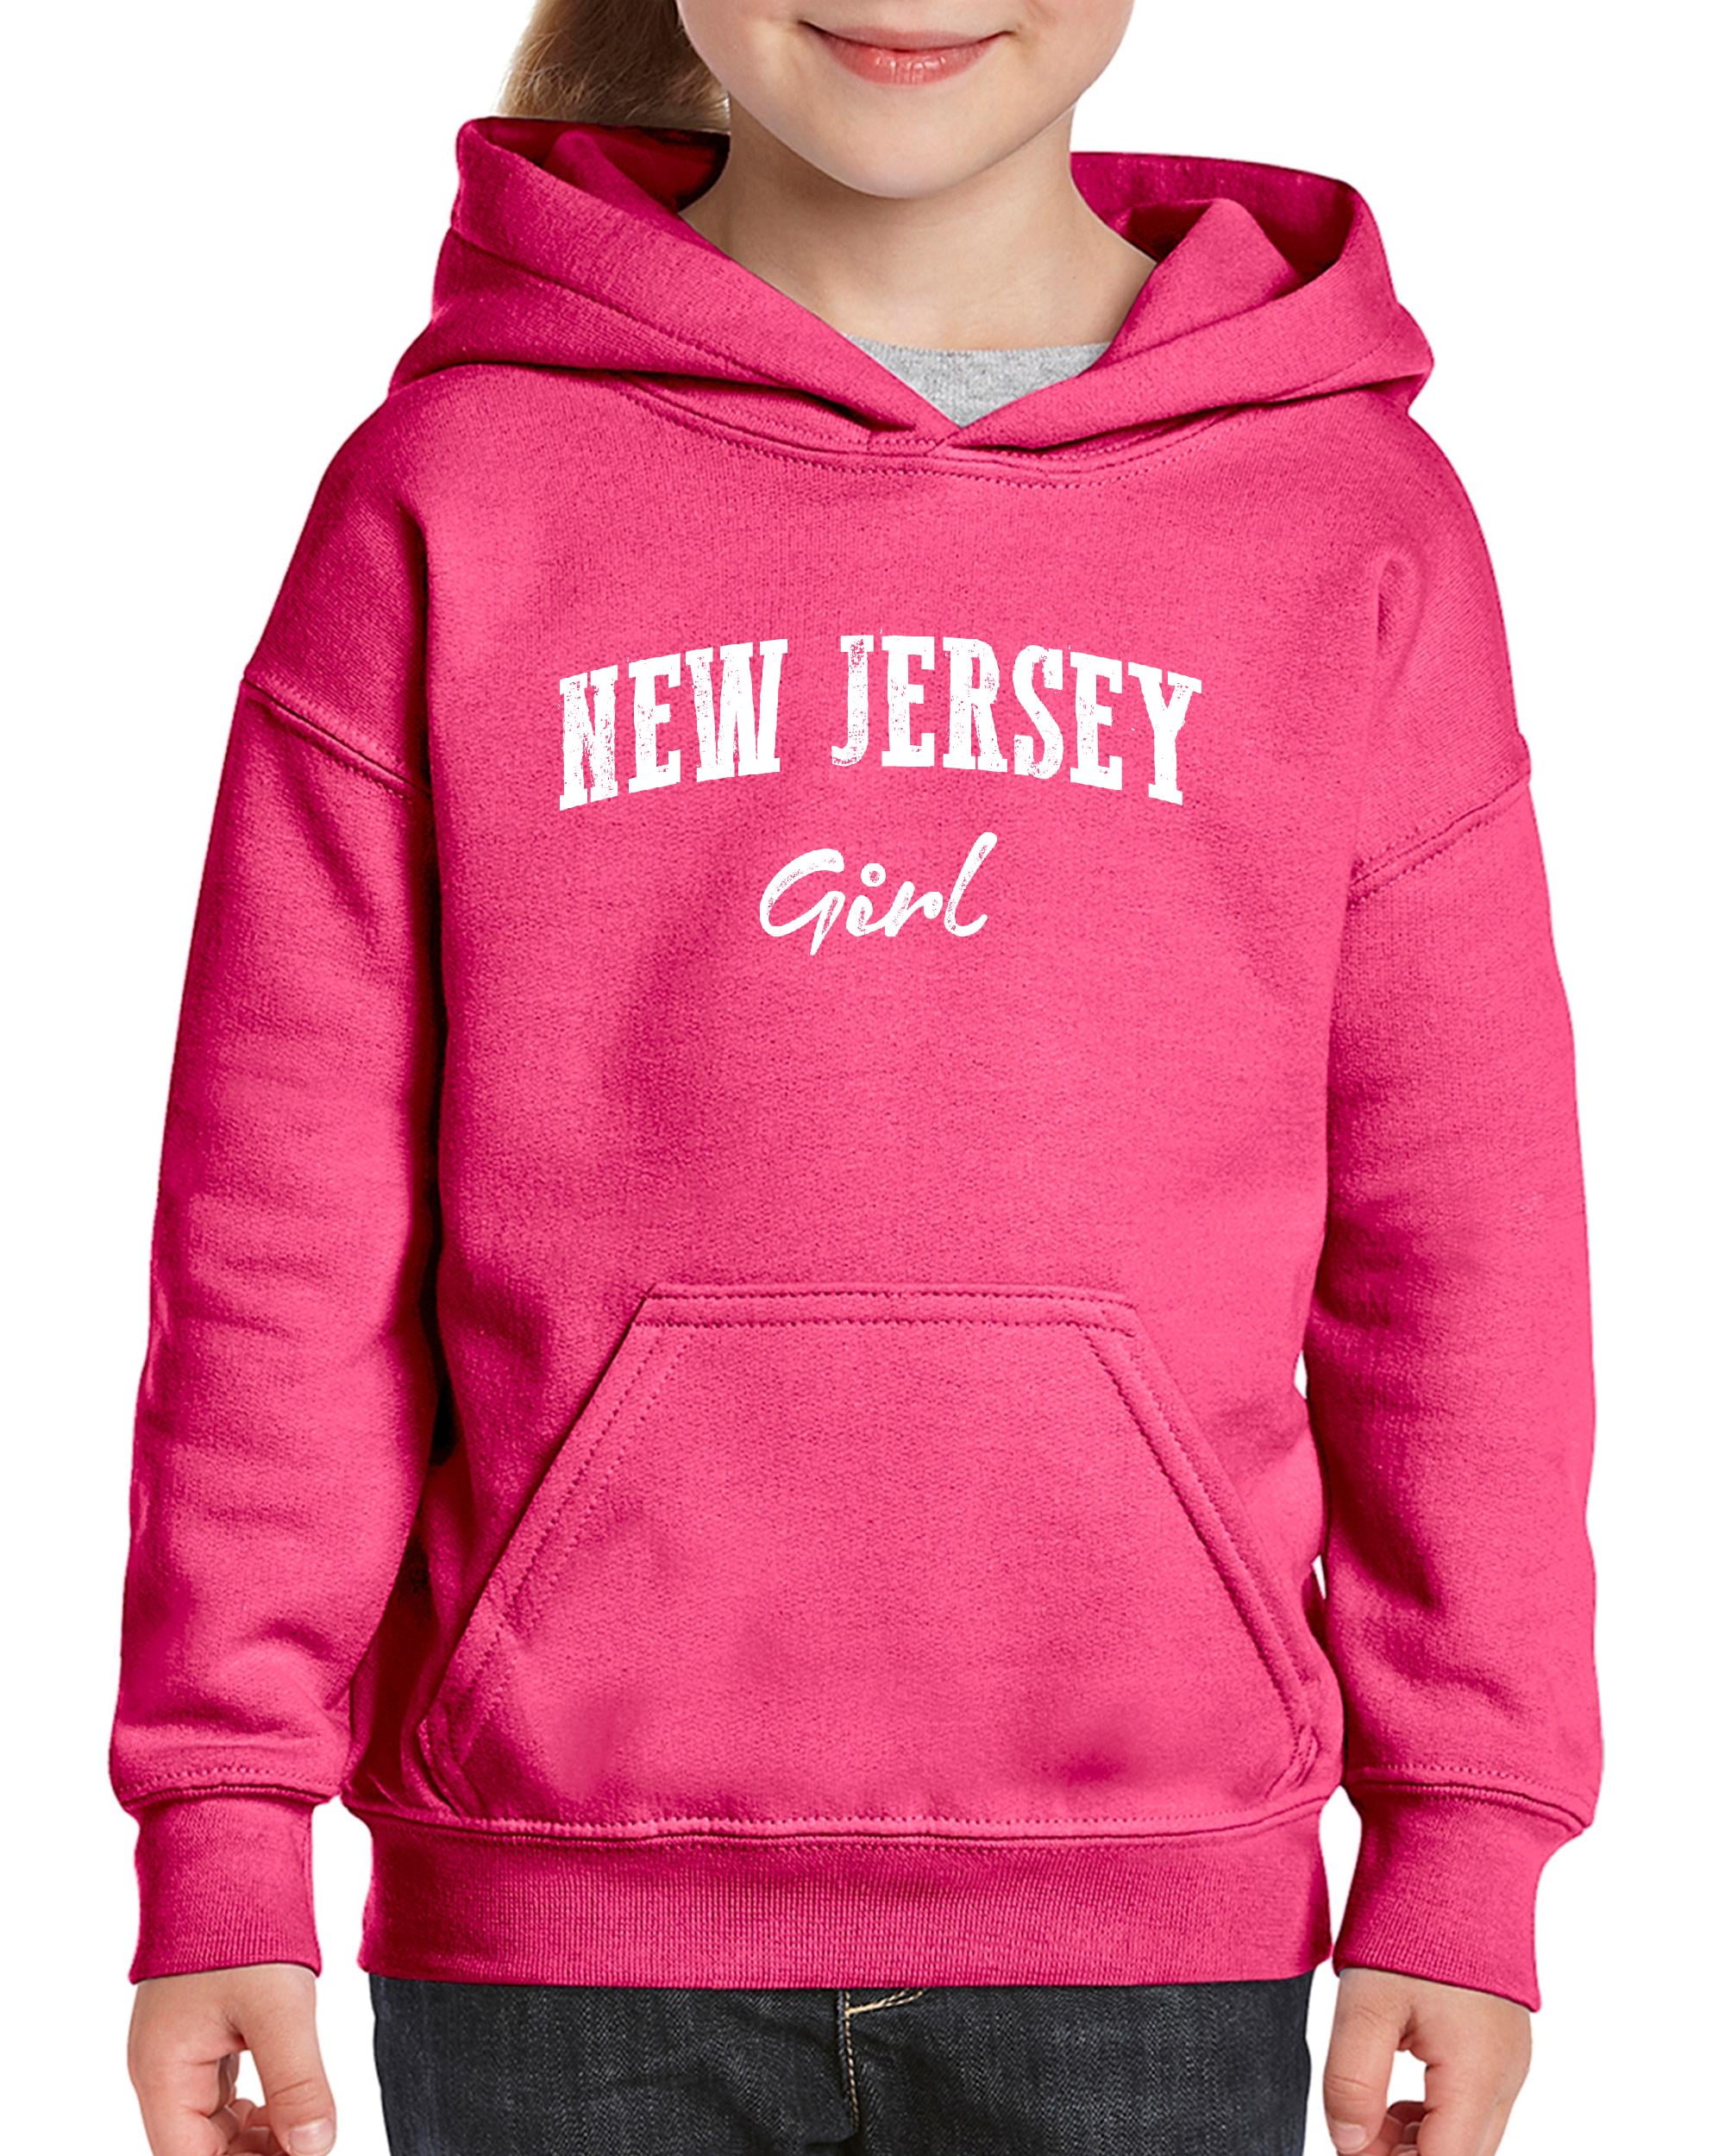 New Jersey Simple Traditional Classic Youth Sweatshirt Boy Girl 